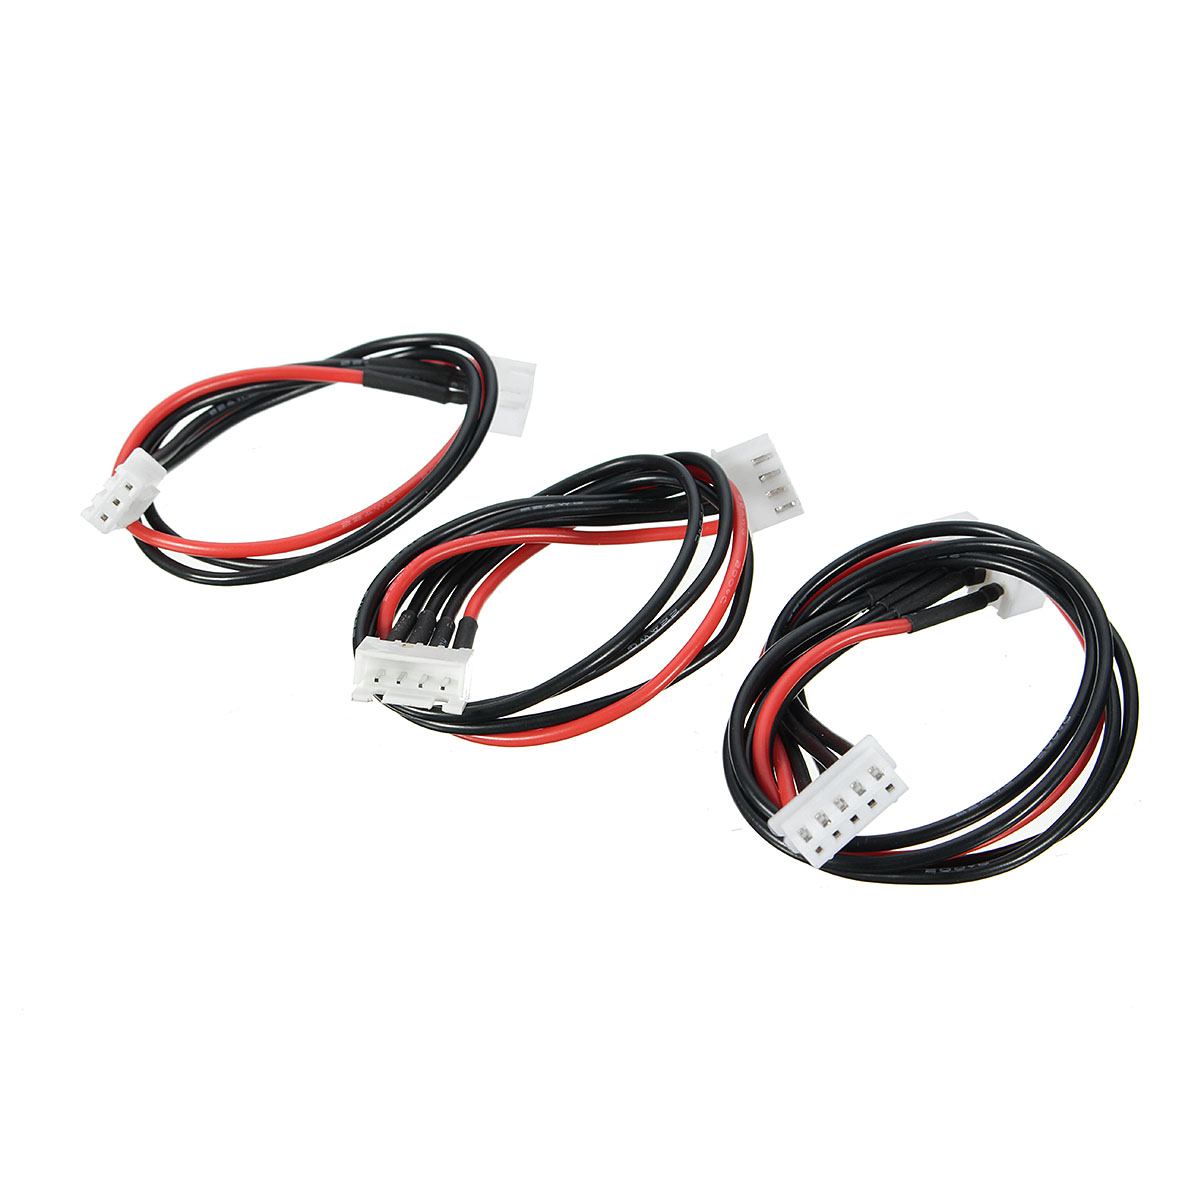 100Pcs-Silicone-Wire-2S3S4S-6-Pin-JST-XH-Connector-Balance-Extension-400MM-Adapter-Cable-1381886-6